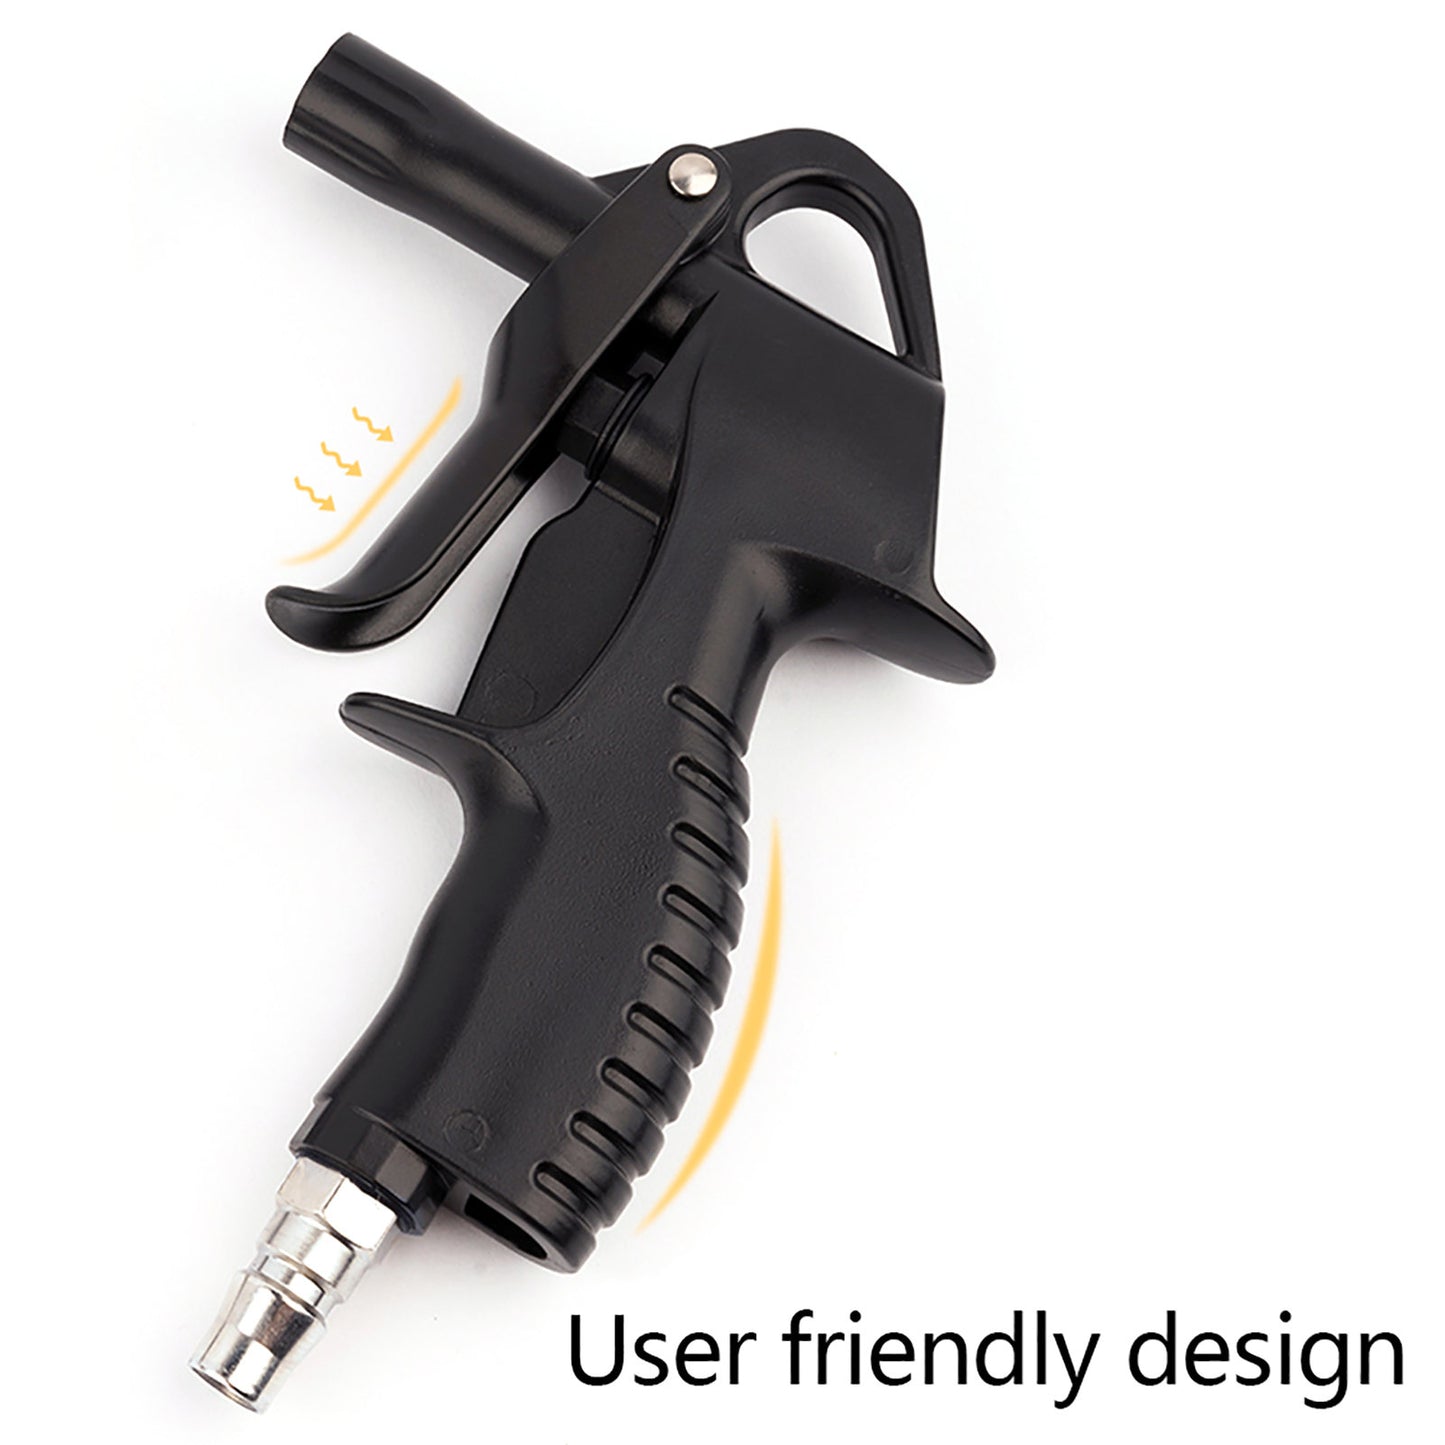 High performance Air Blow Gun with Interchangeable Nozzles – Air Duster for Car